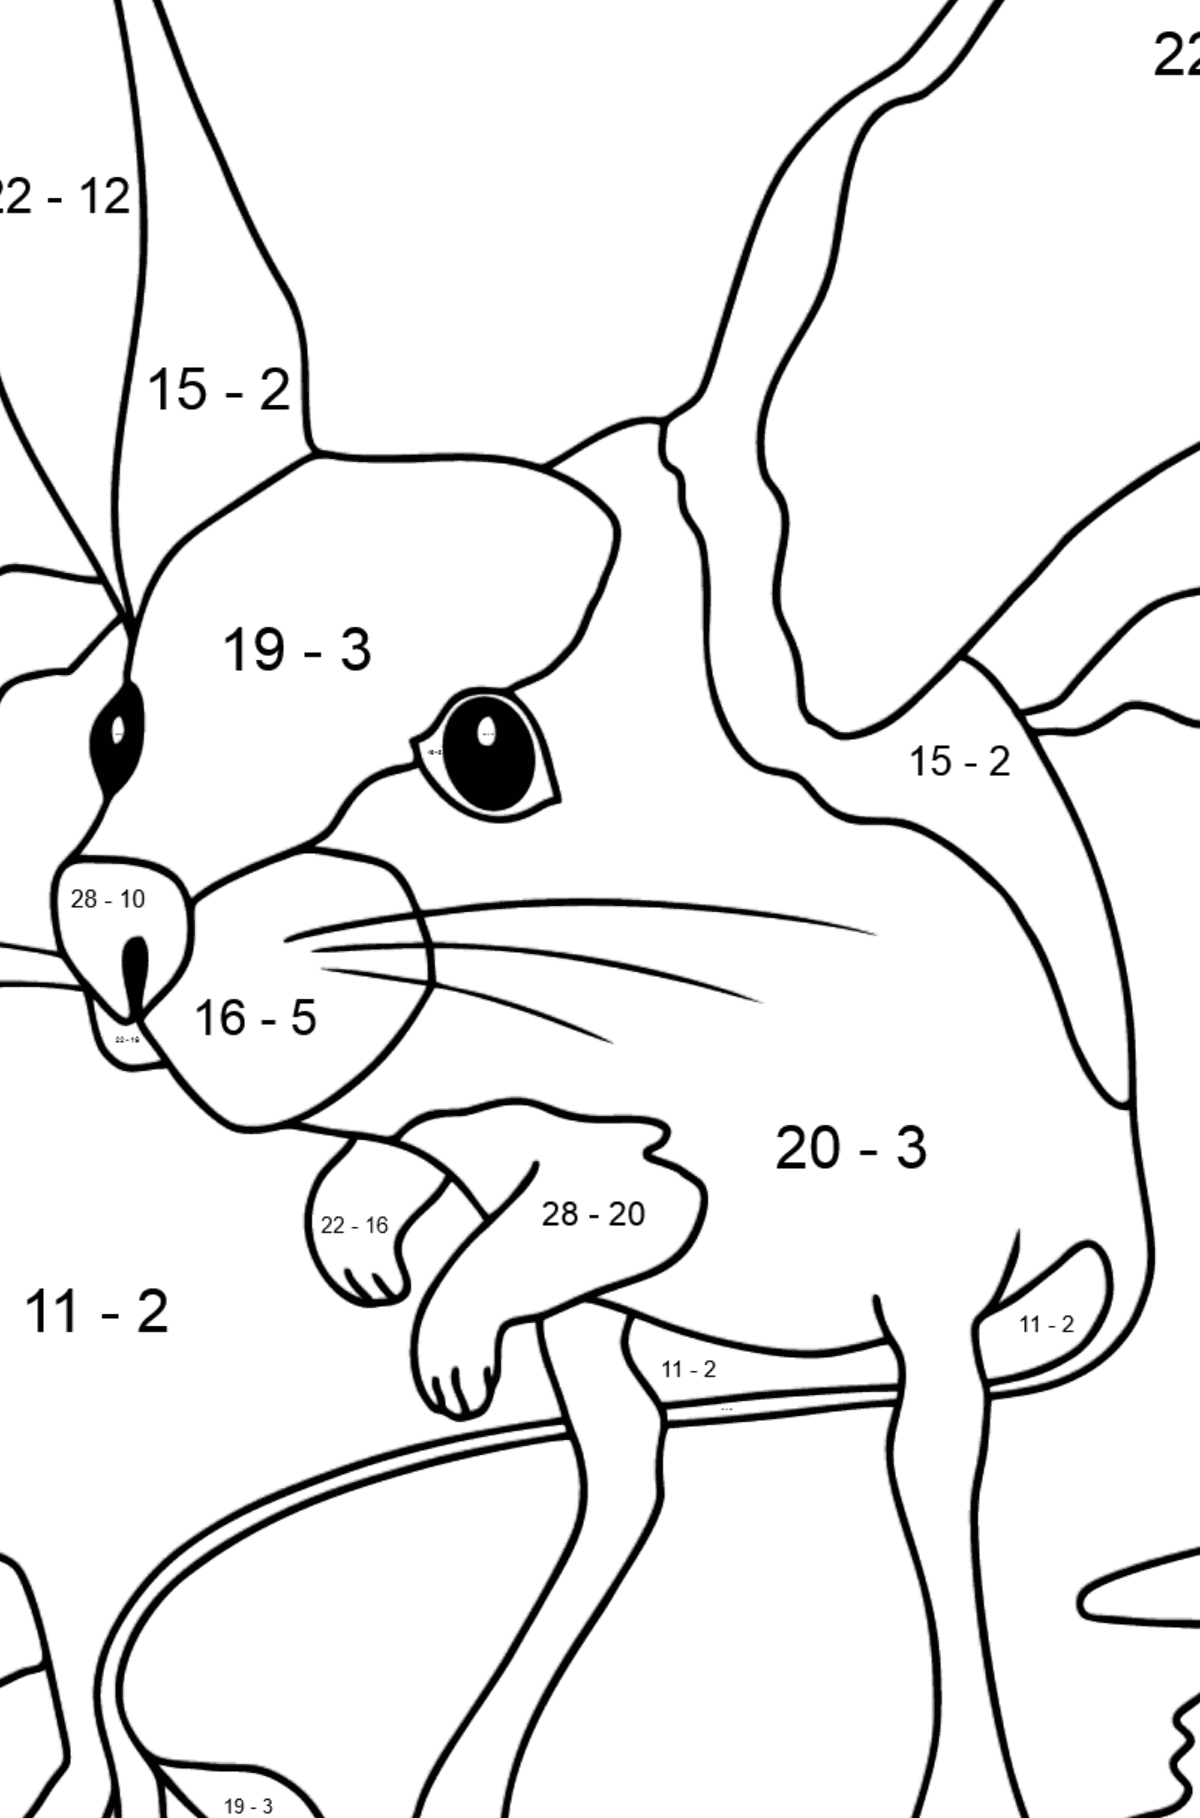 A Jerboa is Inspecting the Area Coloring Page - Math Coloring - Subtraction for Kids